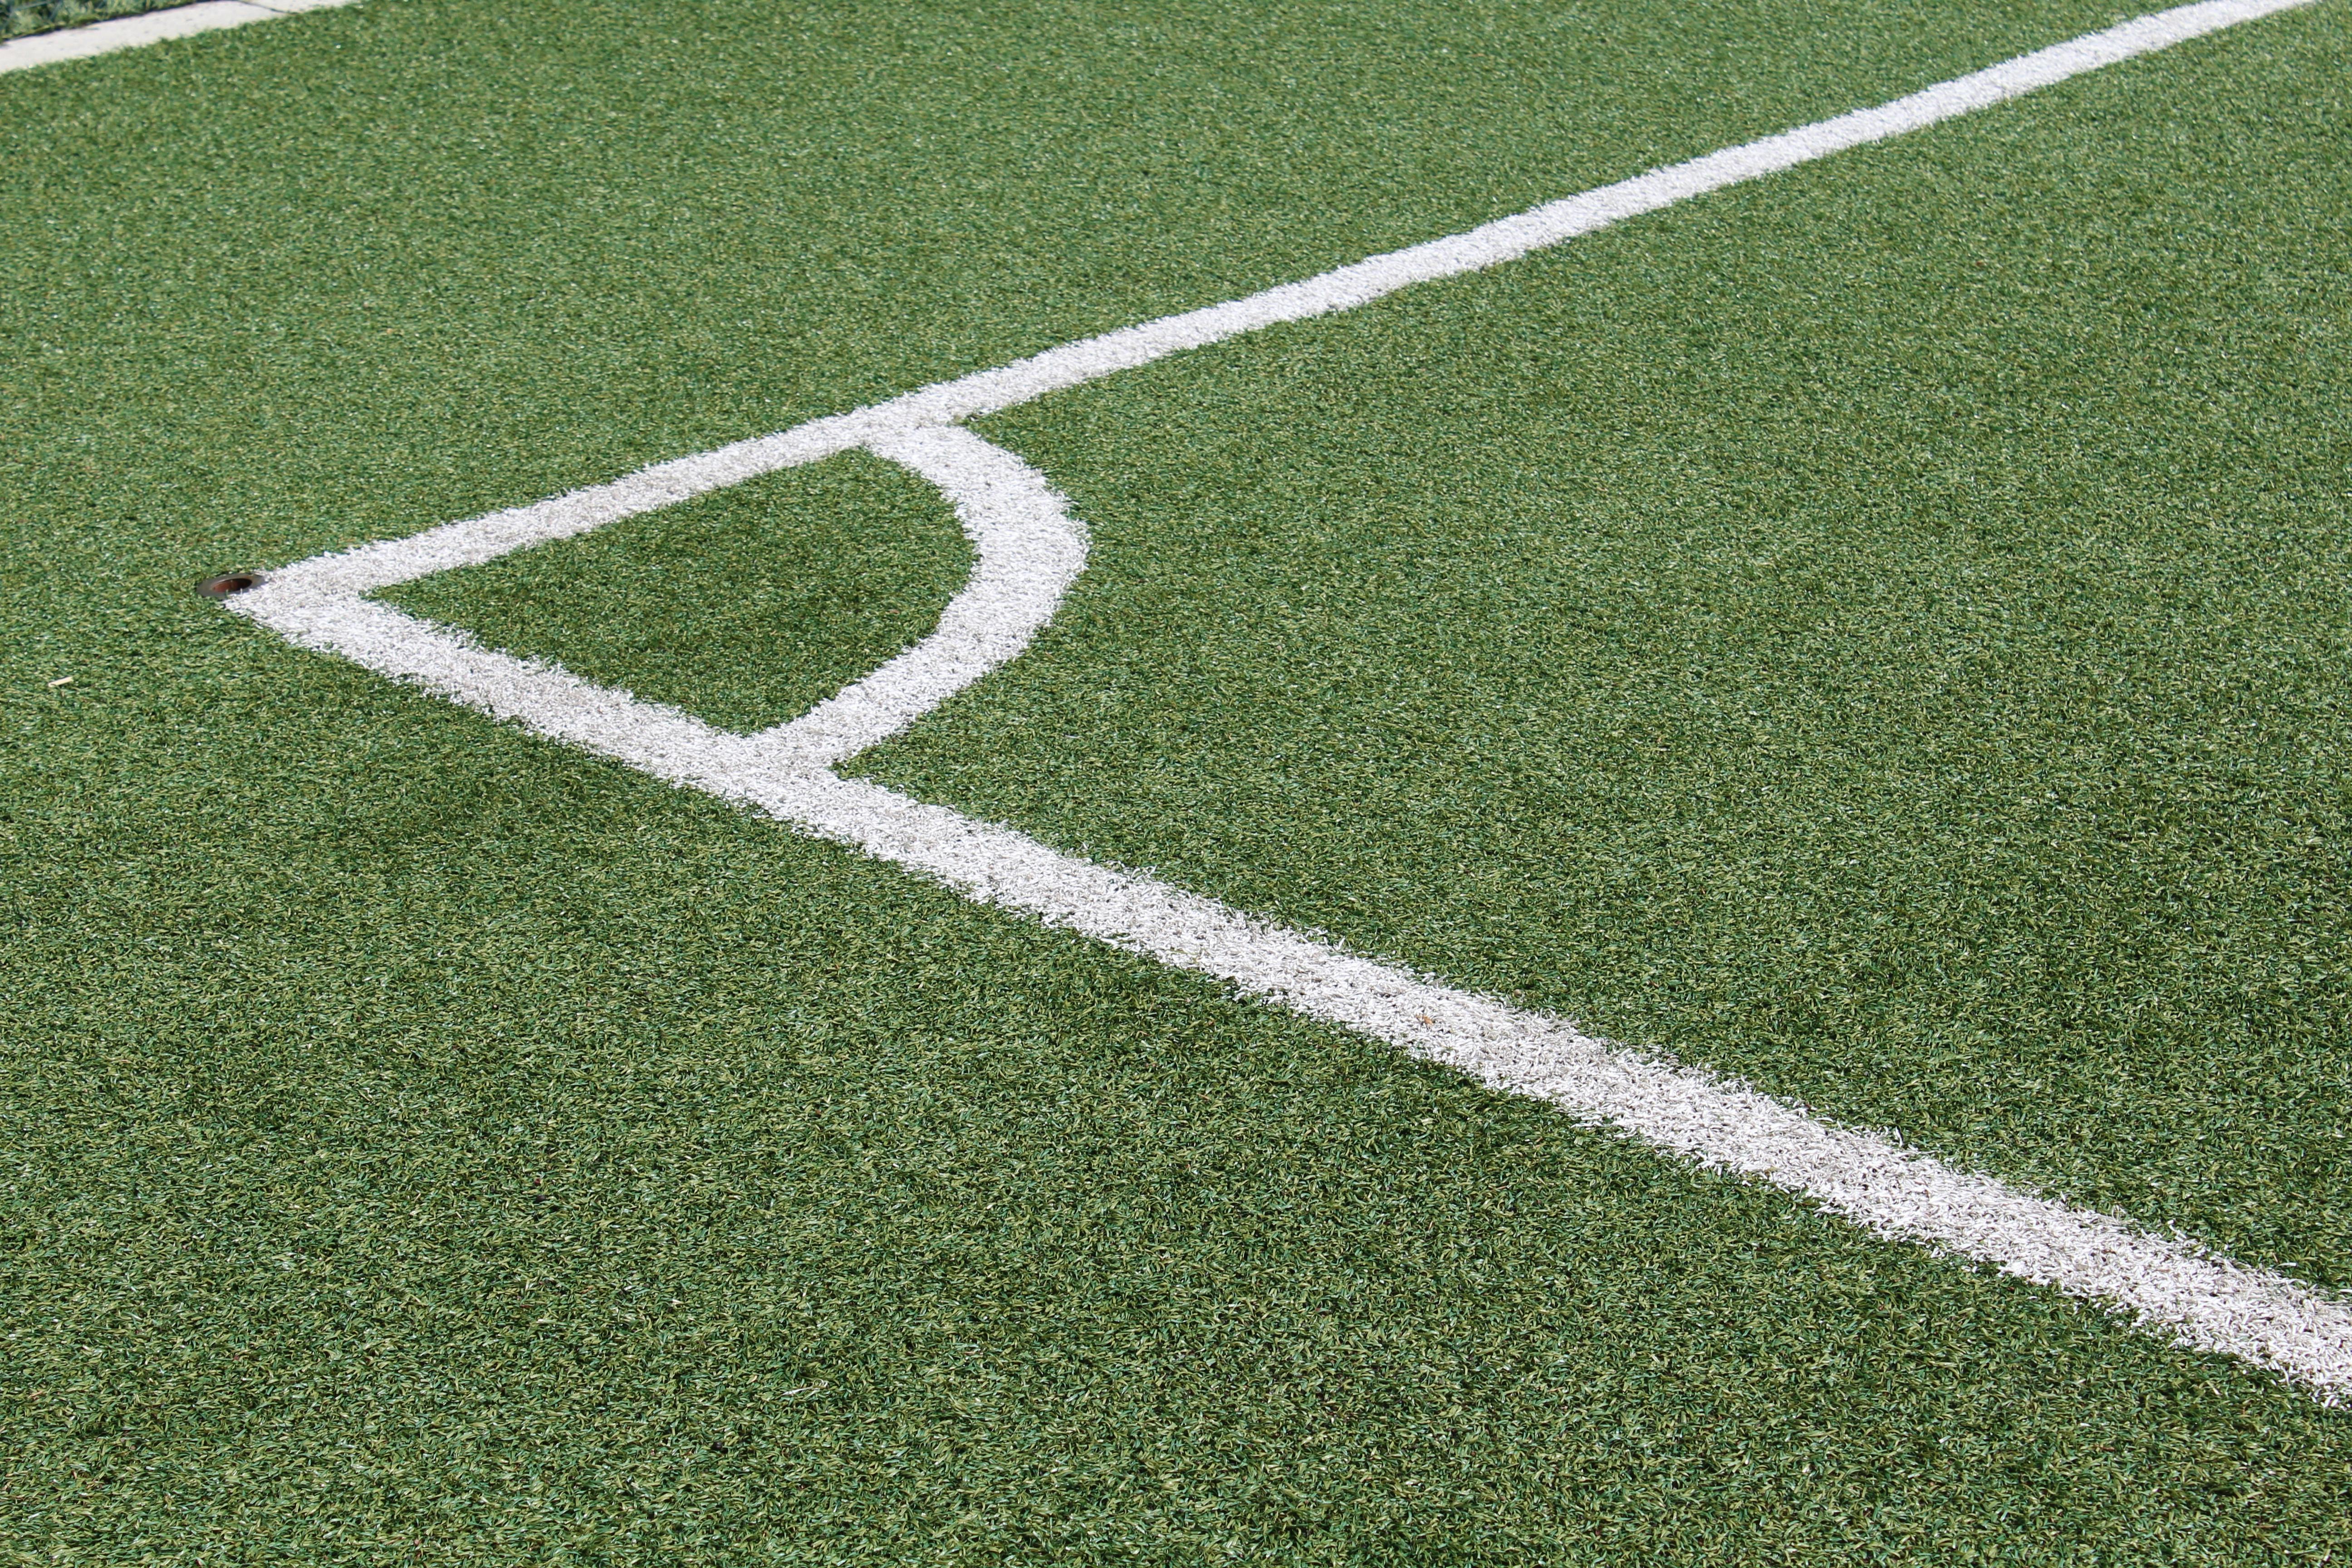 Free stock photo of soccer field, synthetic grass